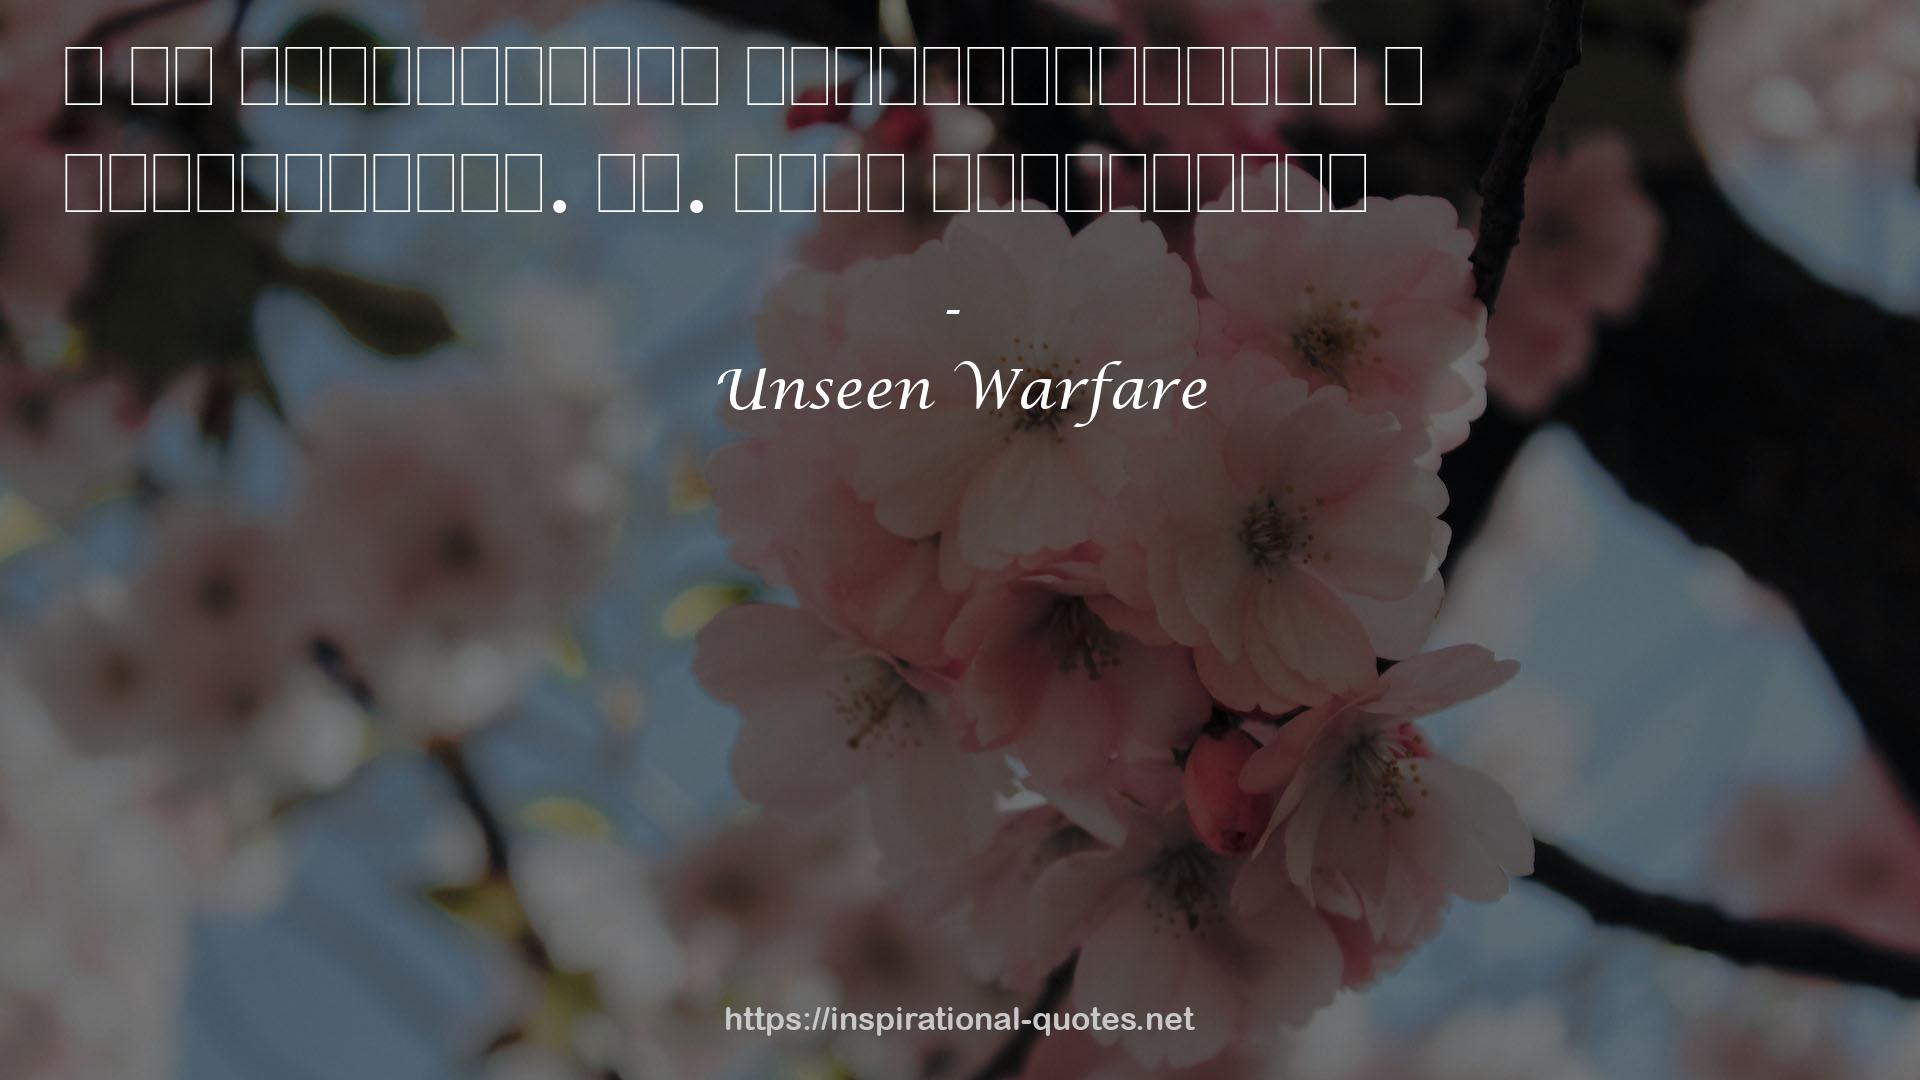 Unseen Warfare QUOTES